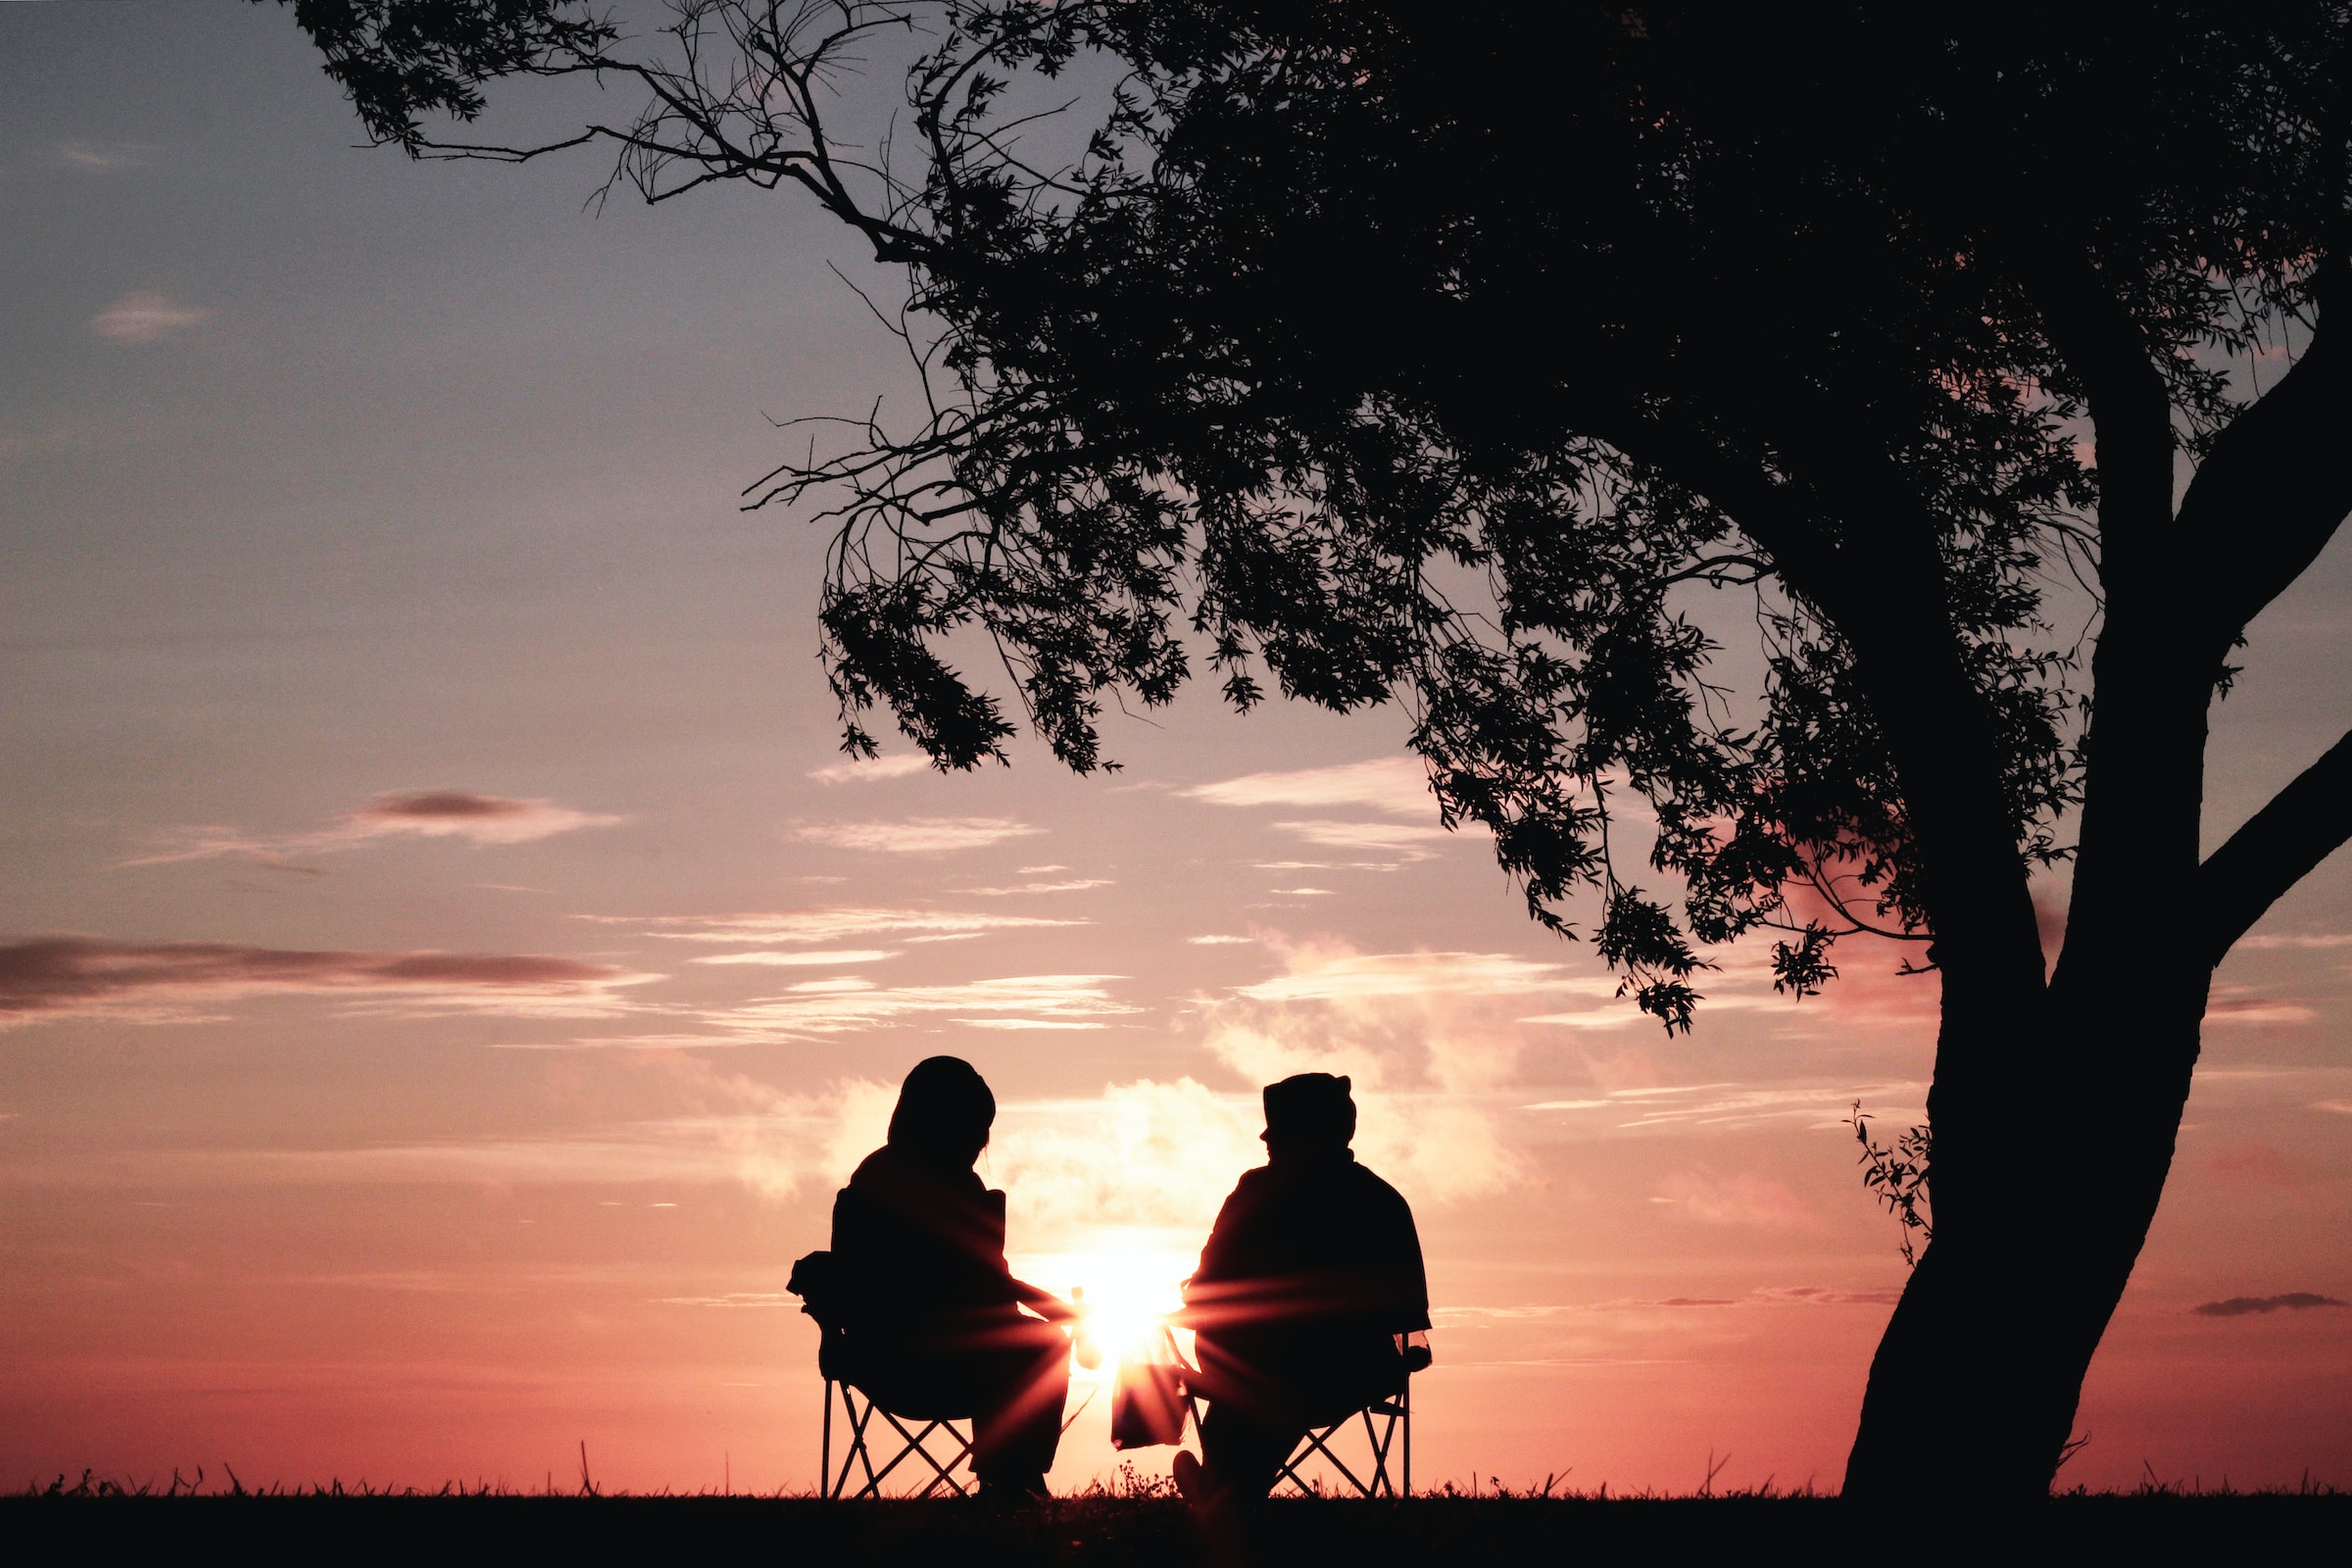 Two people in nature, watching the sunset. | Source: Unsplash